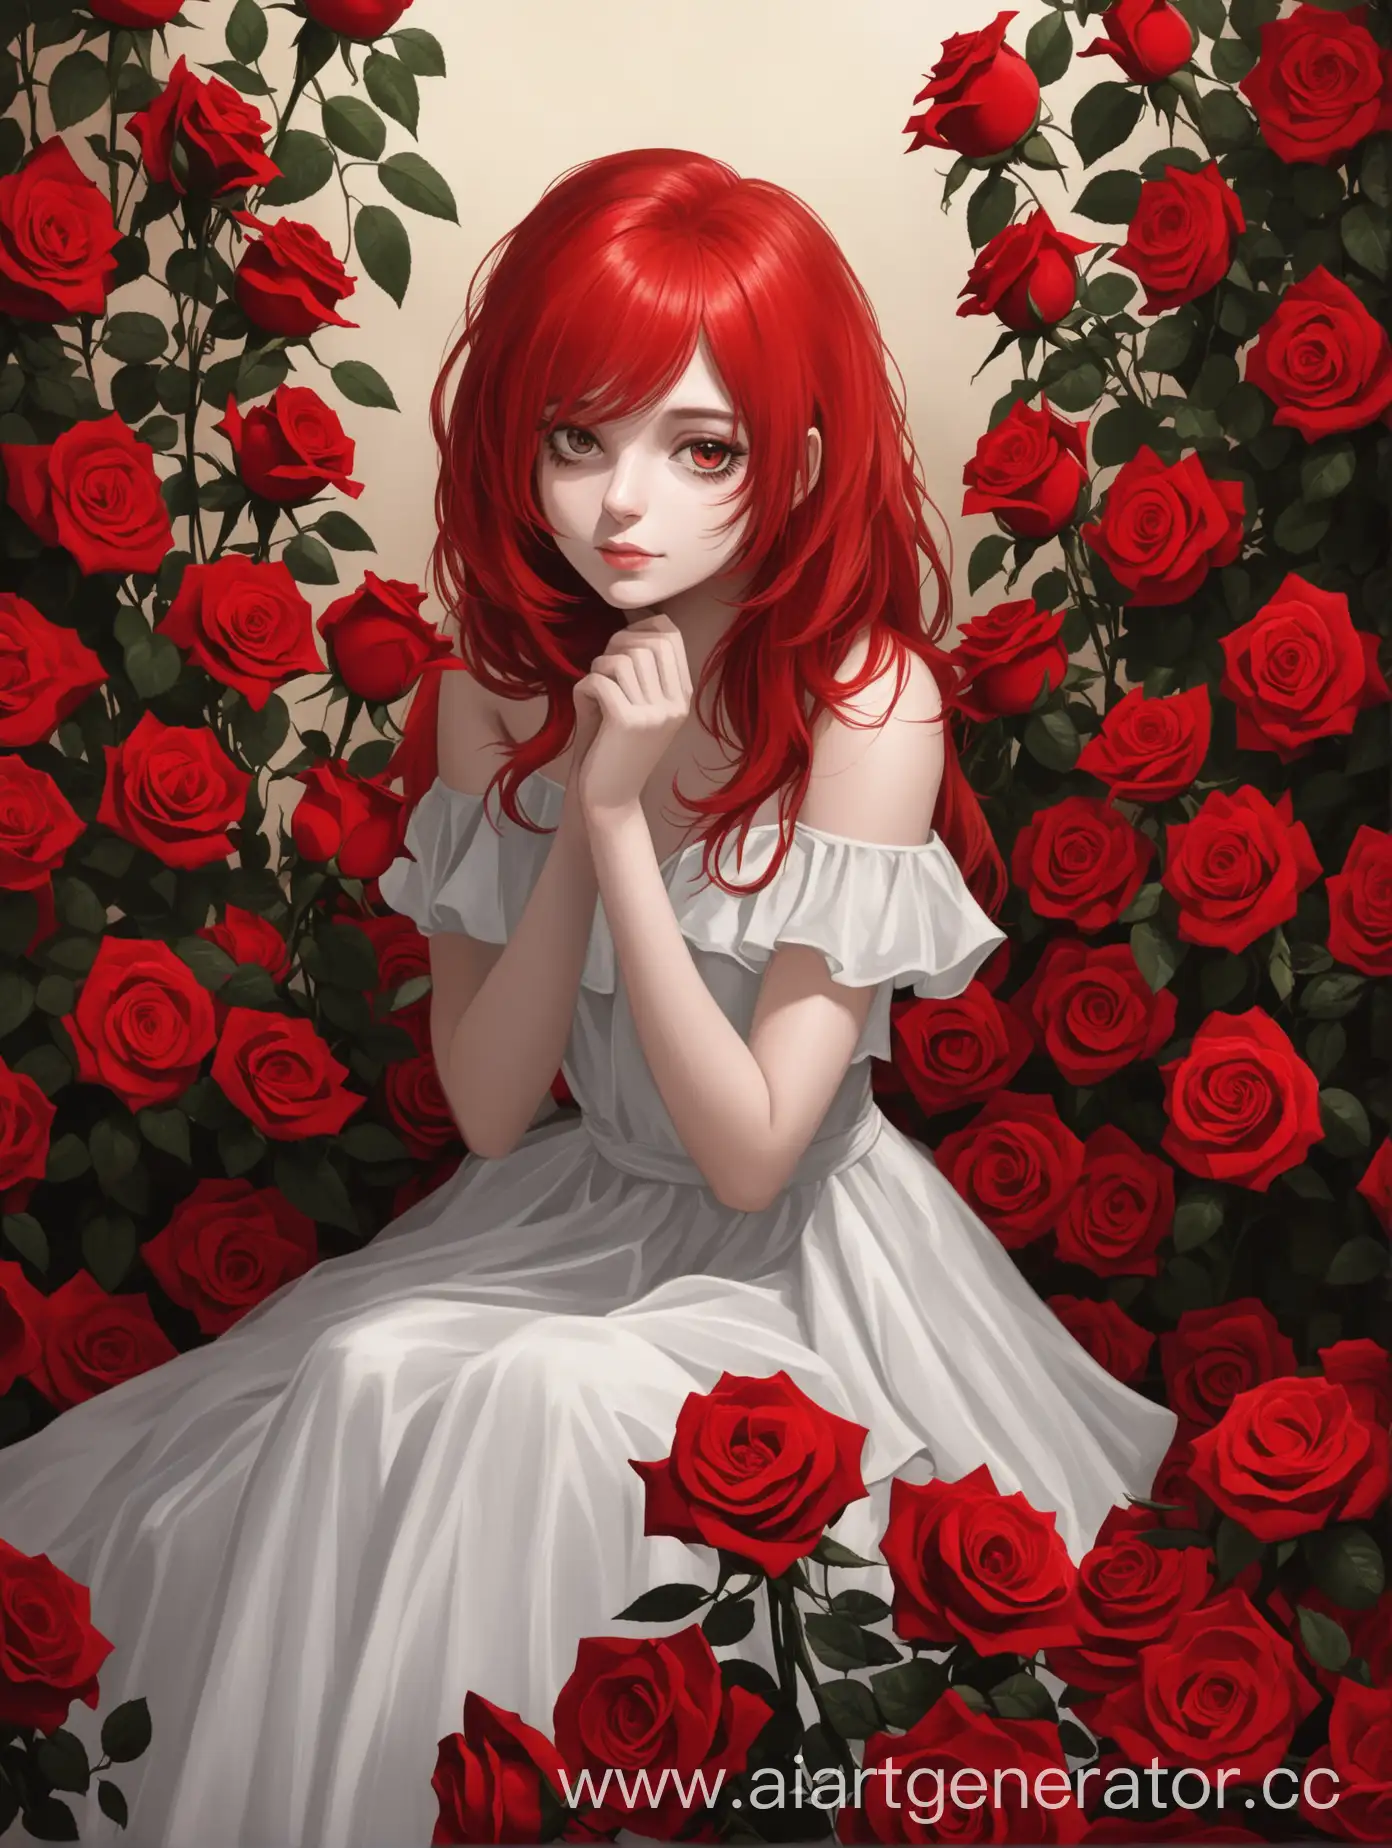 RedHaired-Girl-Sitting-Among-Vibrant-Red-Roses